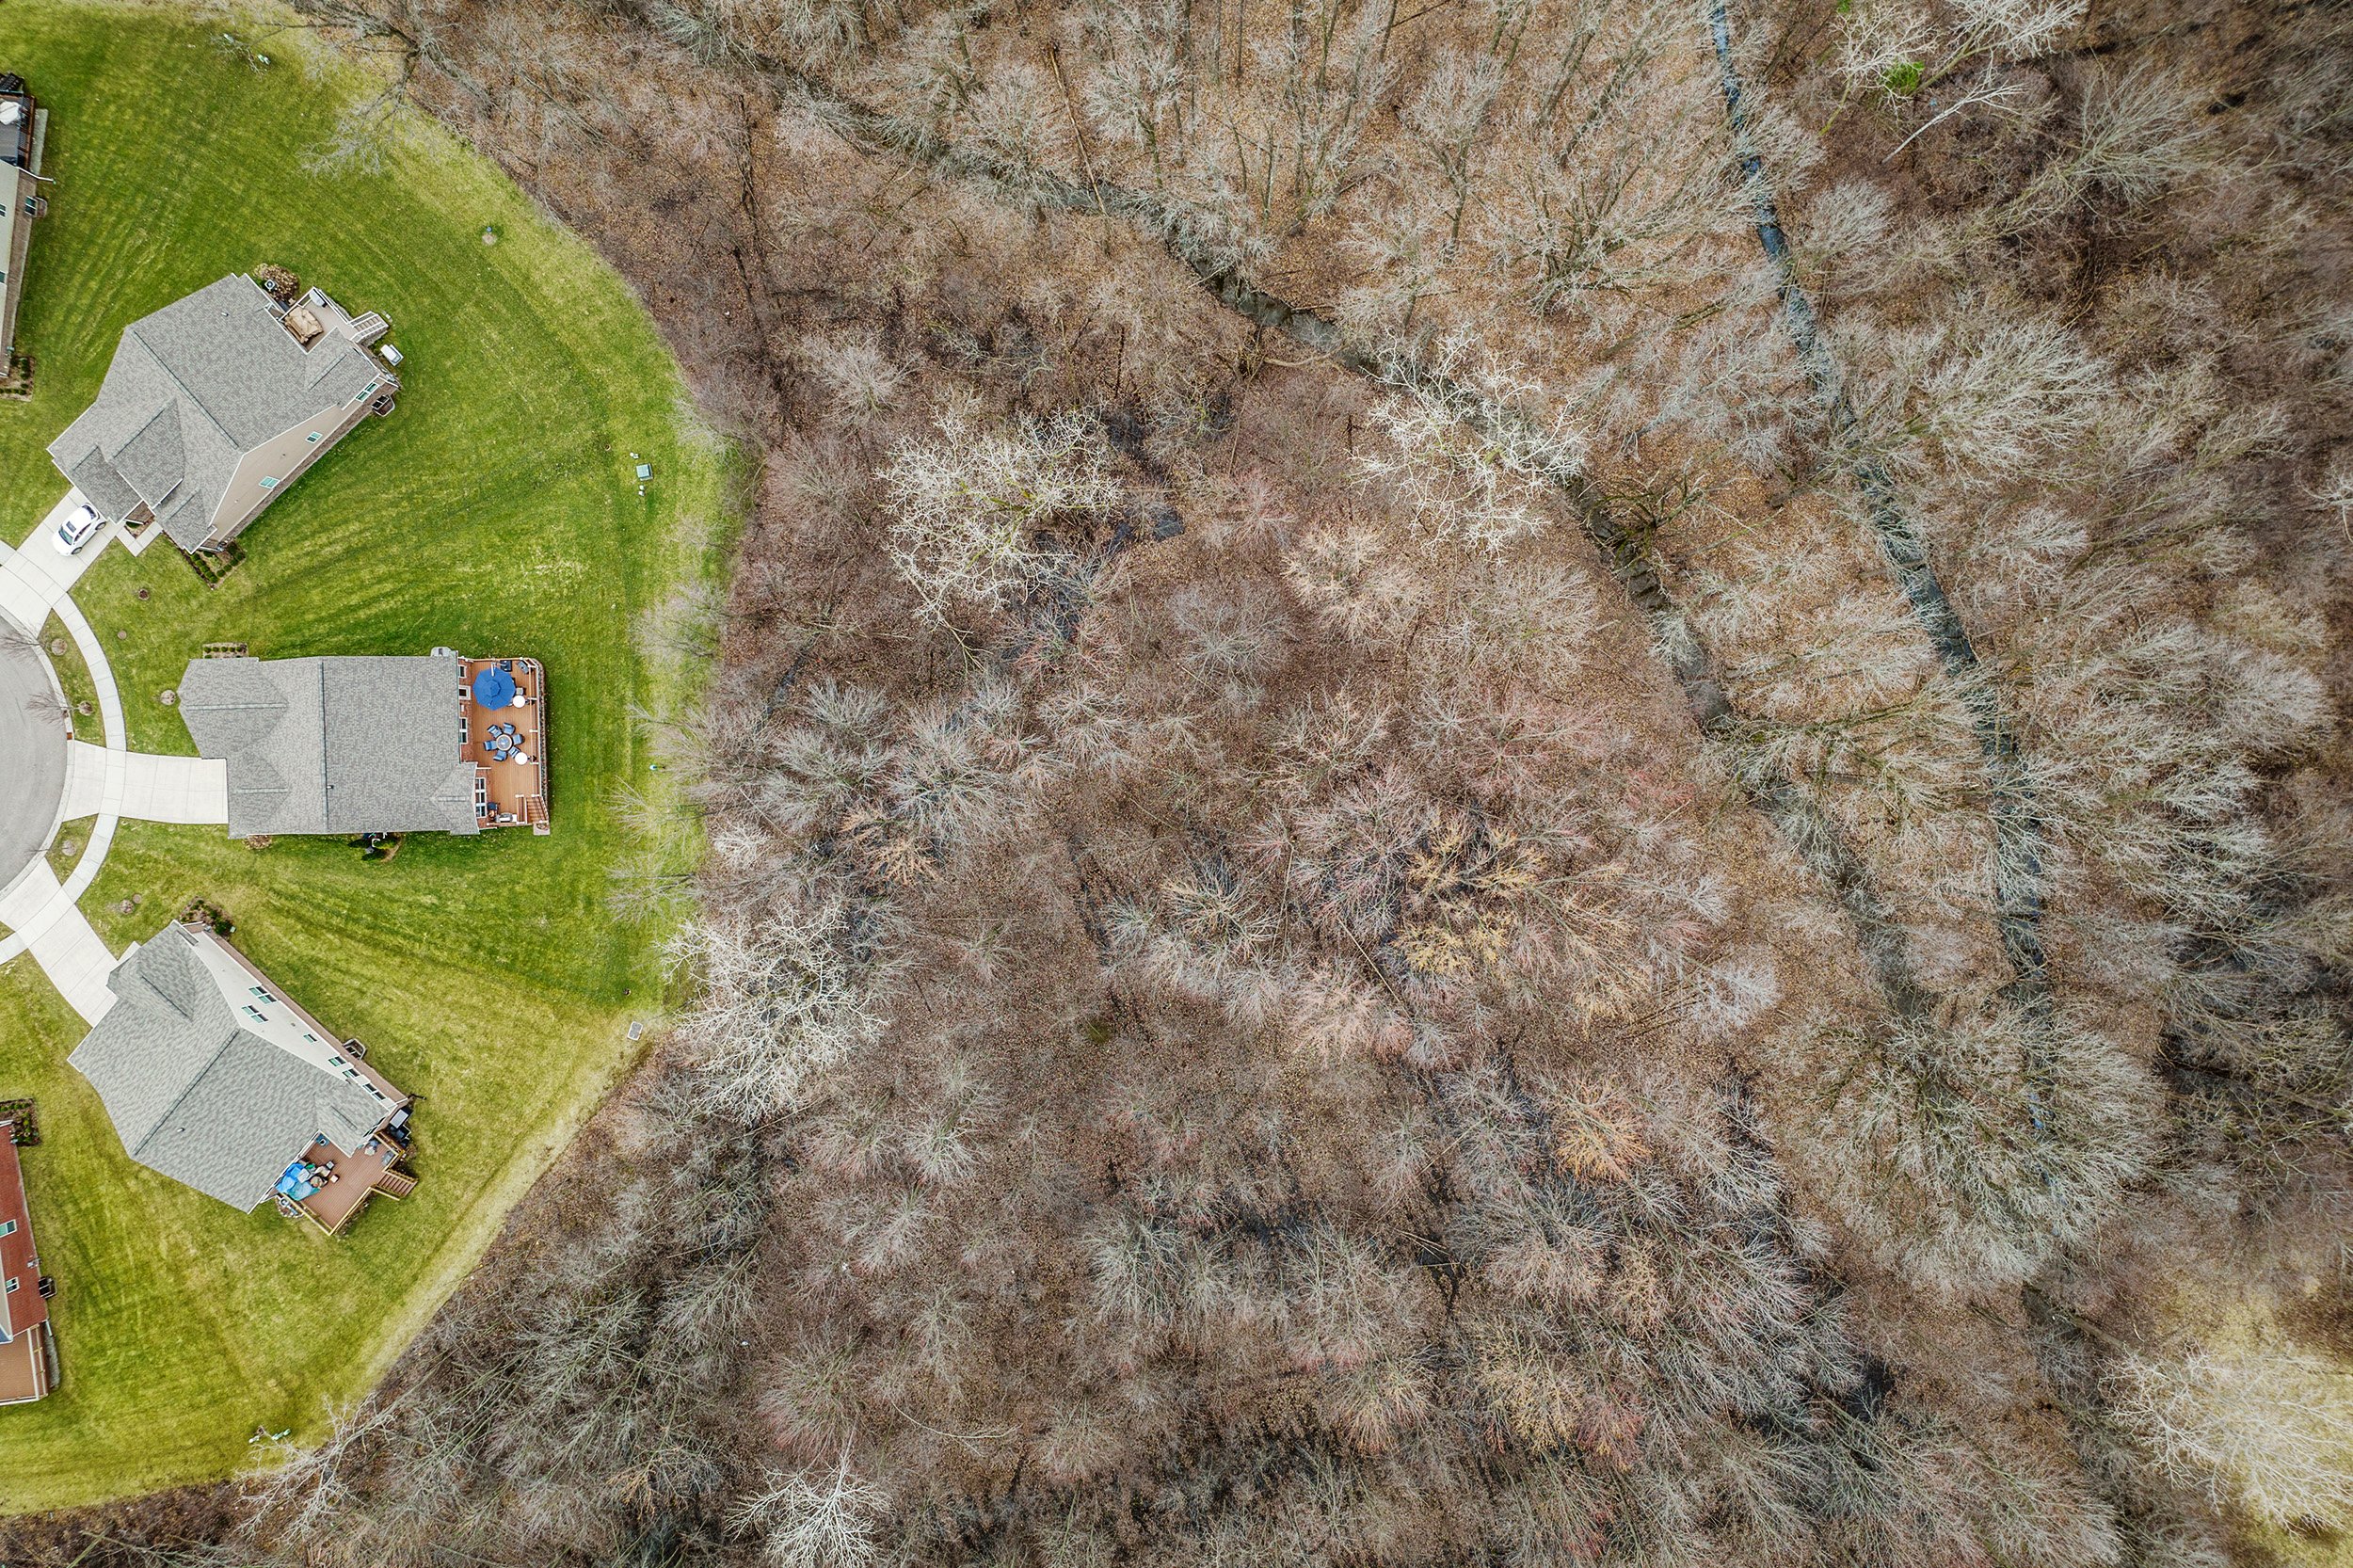  Canton Real Estate Photography - drone photography 